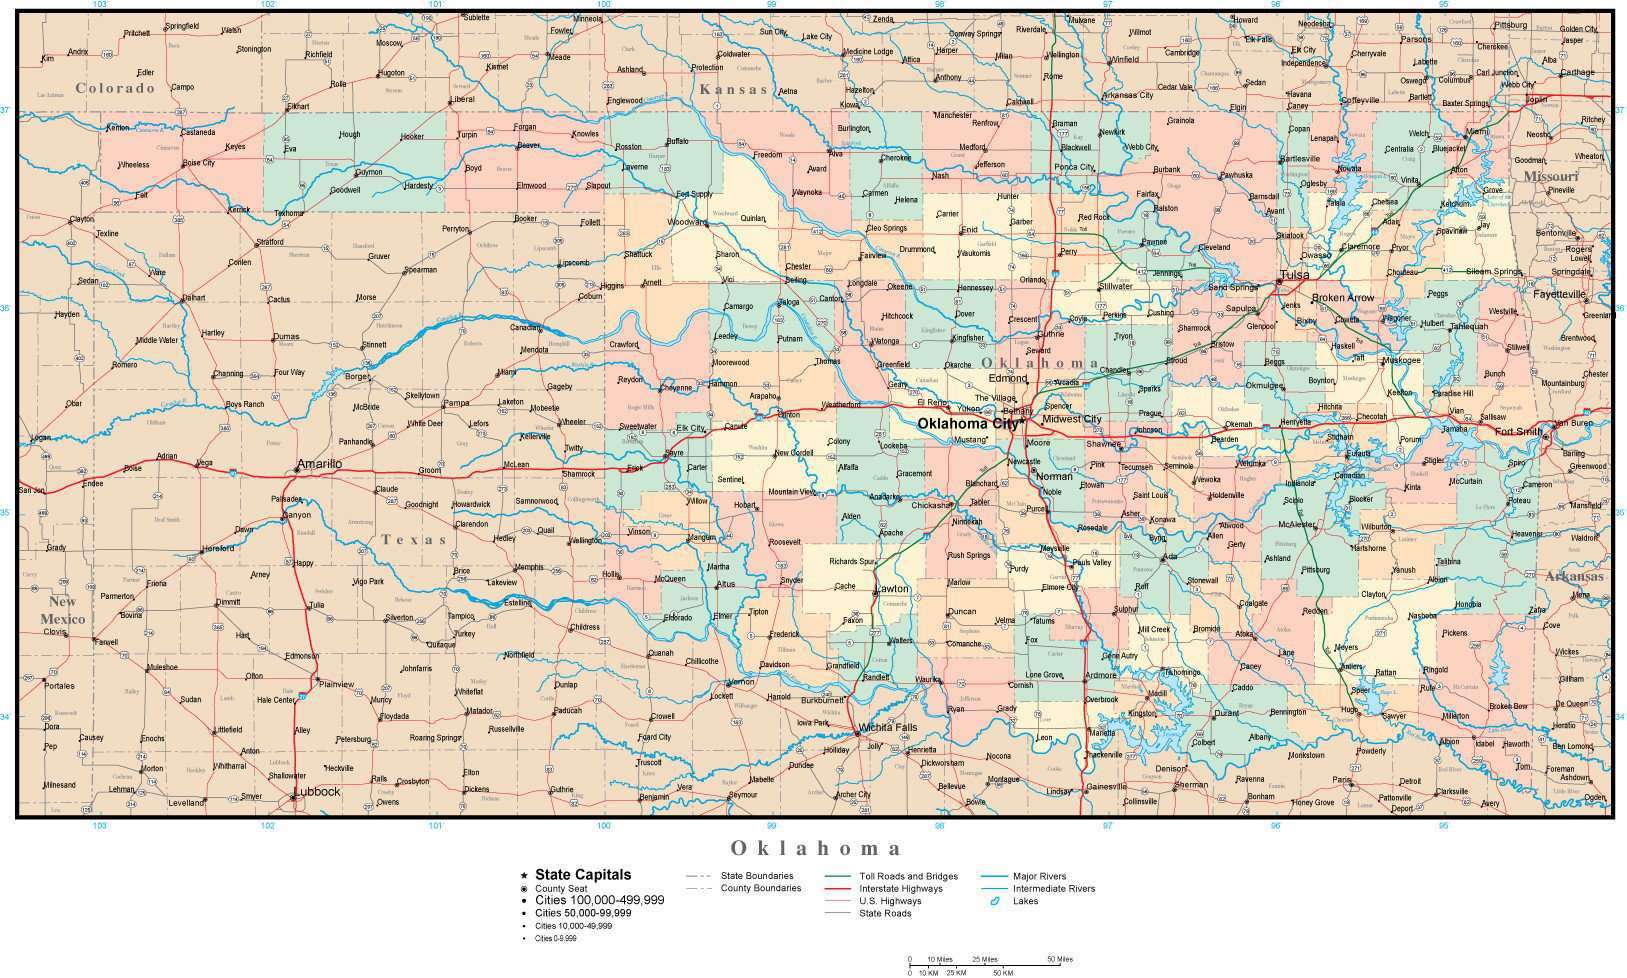 Oklahoma Adobe Illustrator Map with Counties, Cities, County Seats